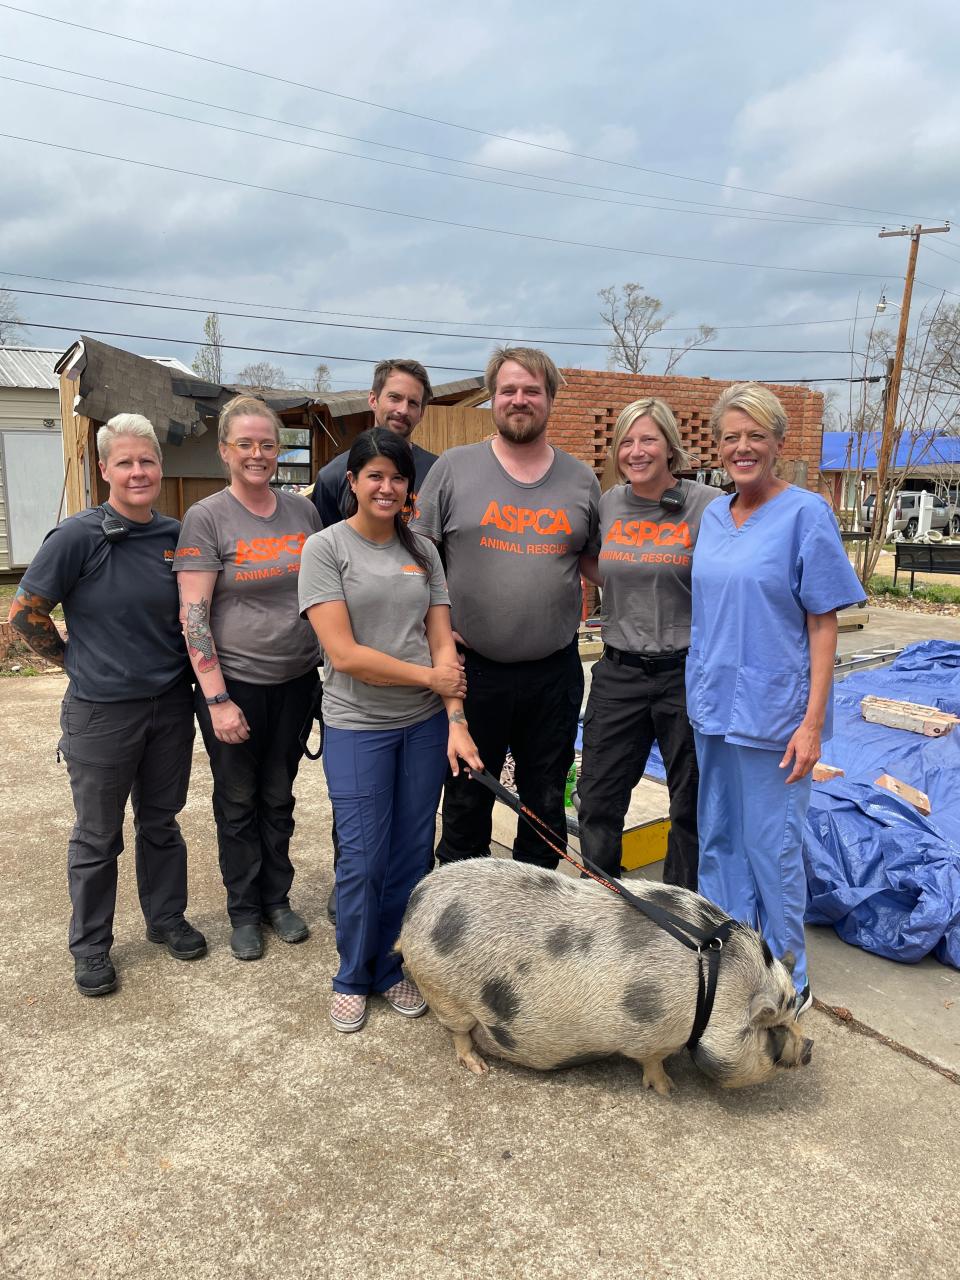 The ASPCA team and Sandra Koenig, right, pose with Oink the pig after her successful return to her owner in Amory, Mississippi.